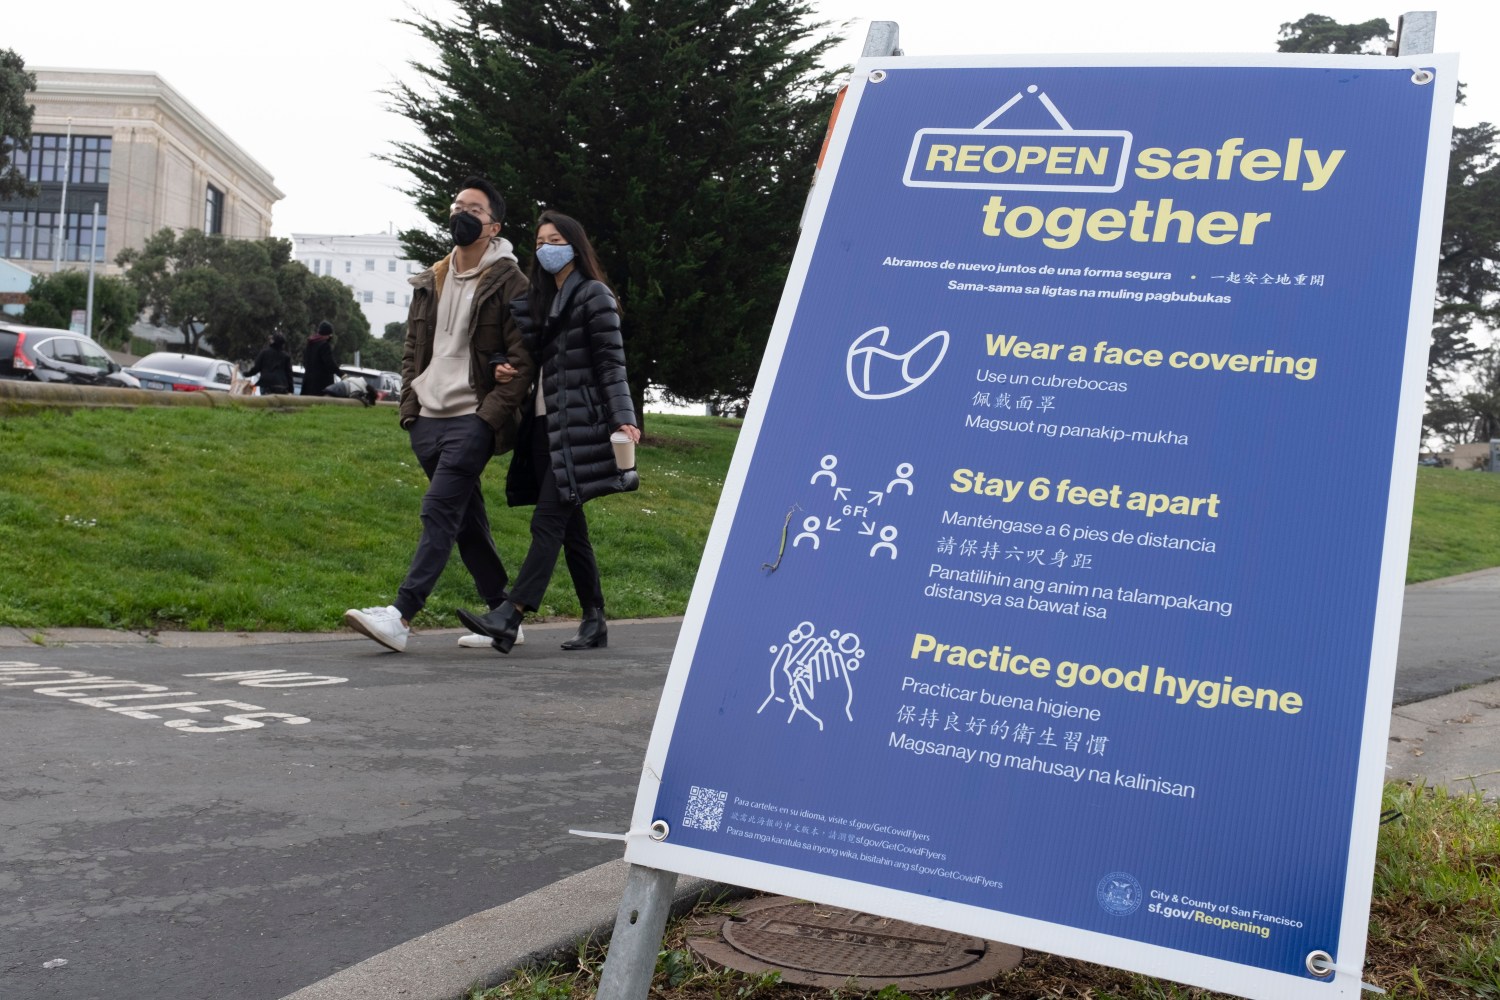 People walk past a sign while wearing masks to prevent contracting and spreading novel coronavirus in San Francisco, California, United States on January 3, 2021. California has implemented shelter-in-place order to encourage people to stay home during the winter holiday to counter the surge of the coronavirus (COVID-19) cases in the global pandemic. U.S. confirmed cases has surpassed 20 millions on the first day of 2021. (Photo by Yichuan Cao/Sipa USA)No Use UK. No Use Germany.